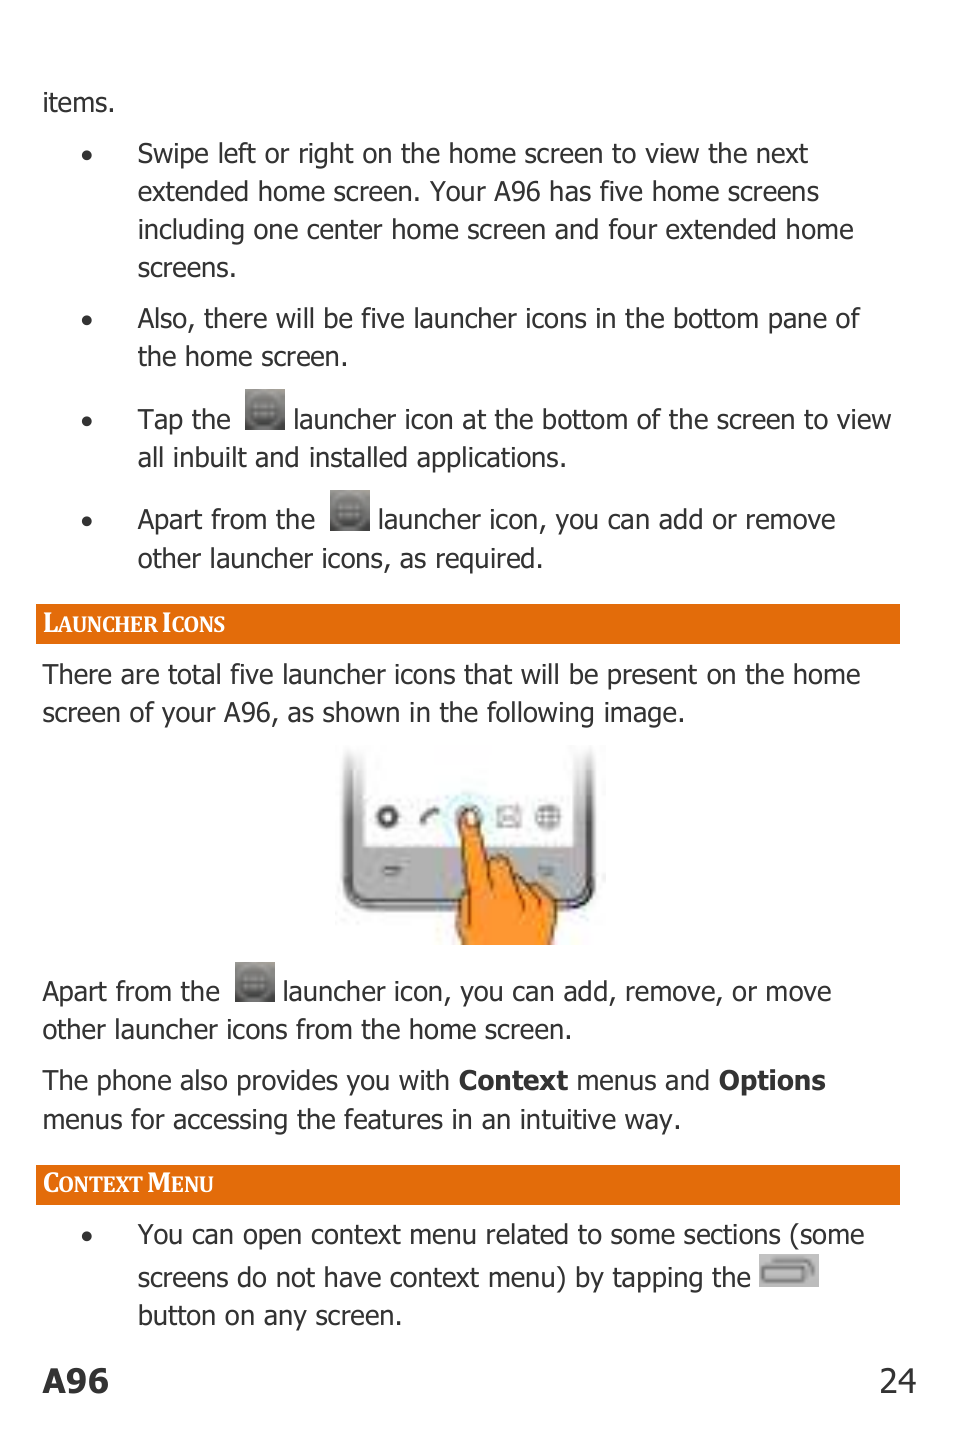 Auncher, Cons, Ontext | A96 24 | Micromax Canvas Power User Manual | Page 24 / 56